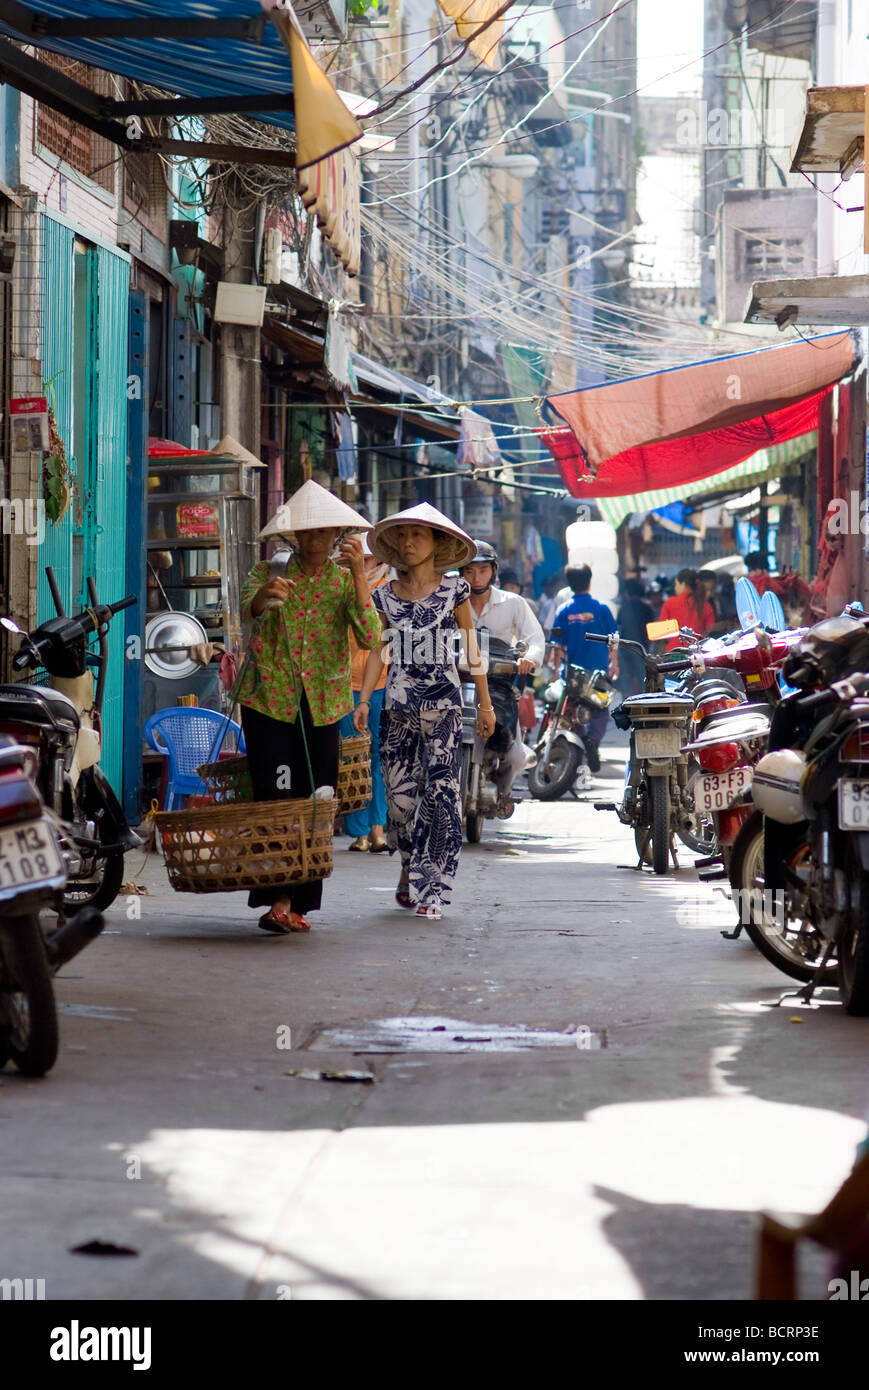 Narrow backstreet with people and motorbikes in Cho Lon the chinatown of Ho Chi Minh City Vietnam Stock Photo